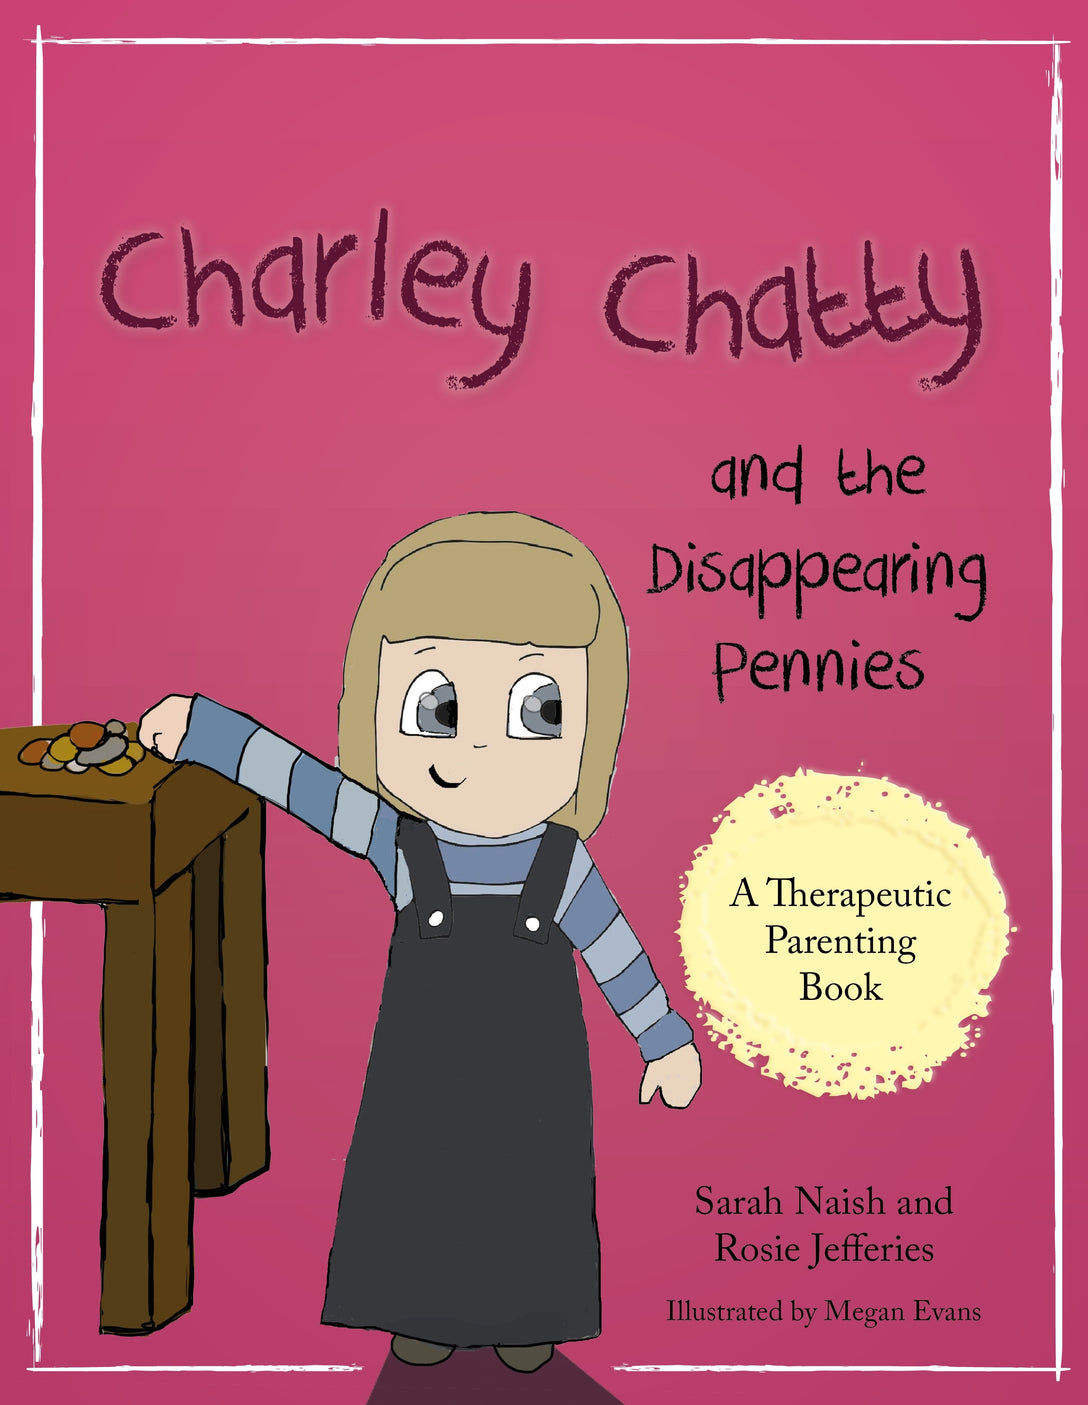 Charley Chatty and the Disappearing Pennies by Sarah Naish, Rosie Jefferies, Megan Evans